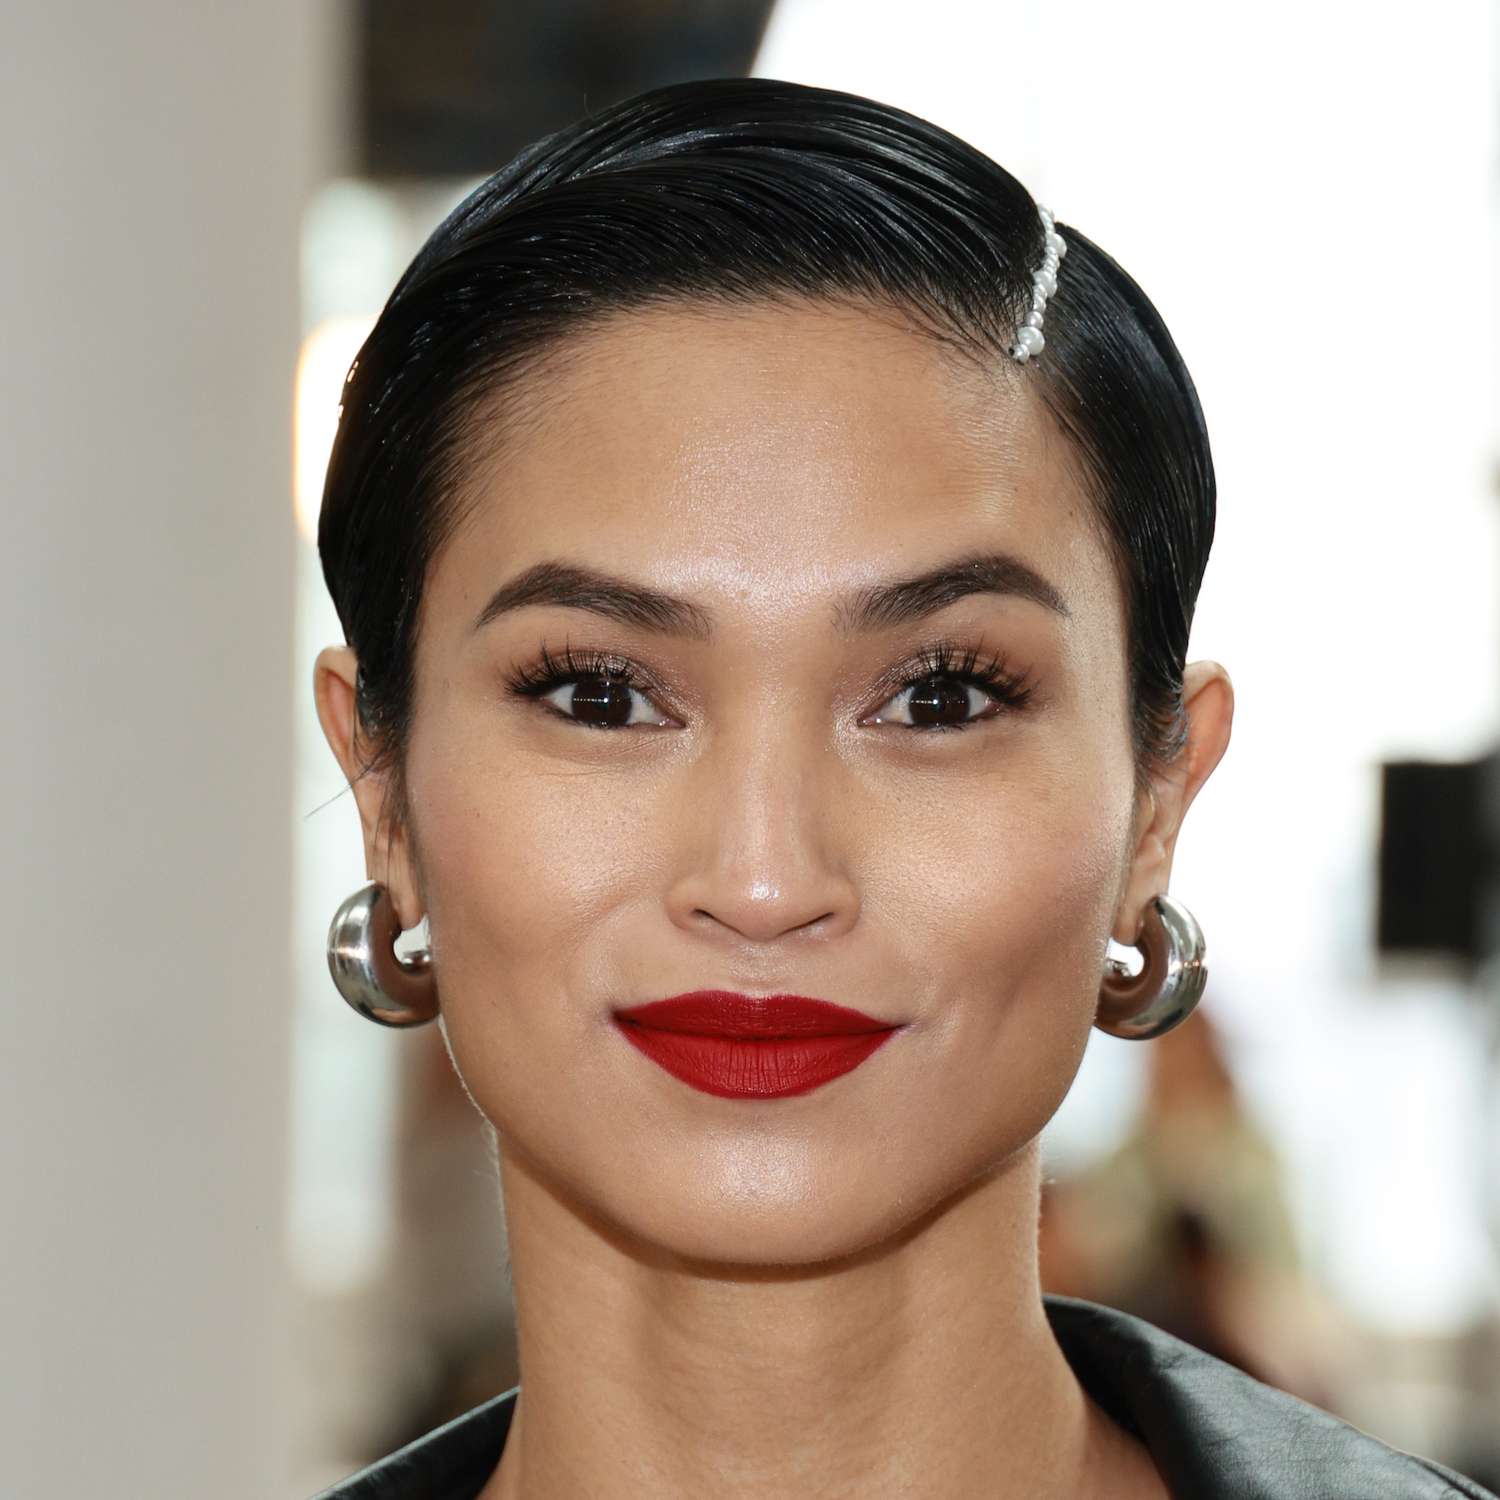 Sharina Gutierrez attends NYFW with a side parted pixie and a pearl strand adorned within her part